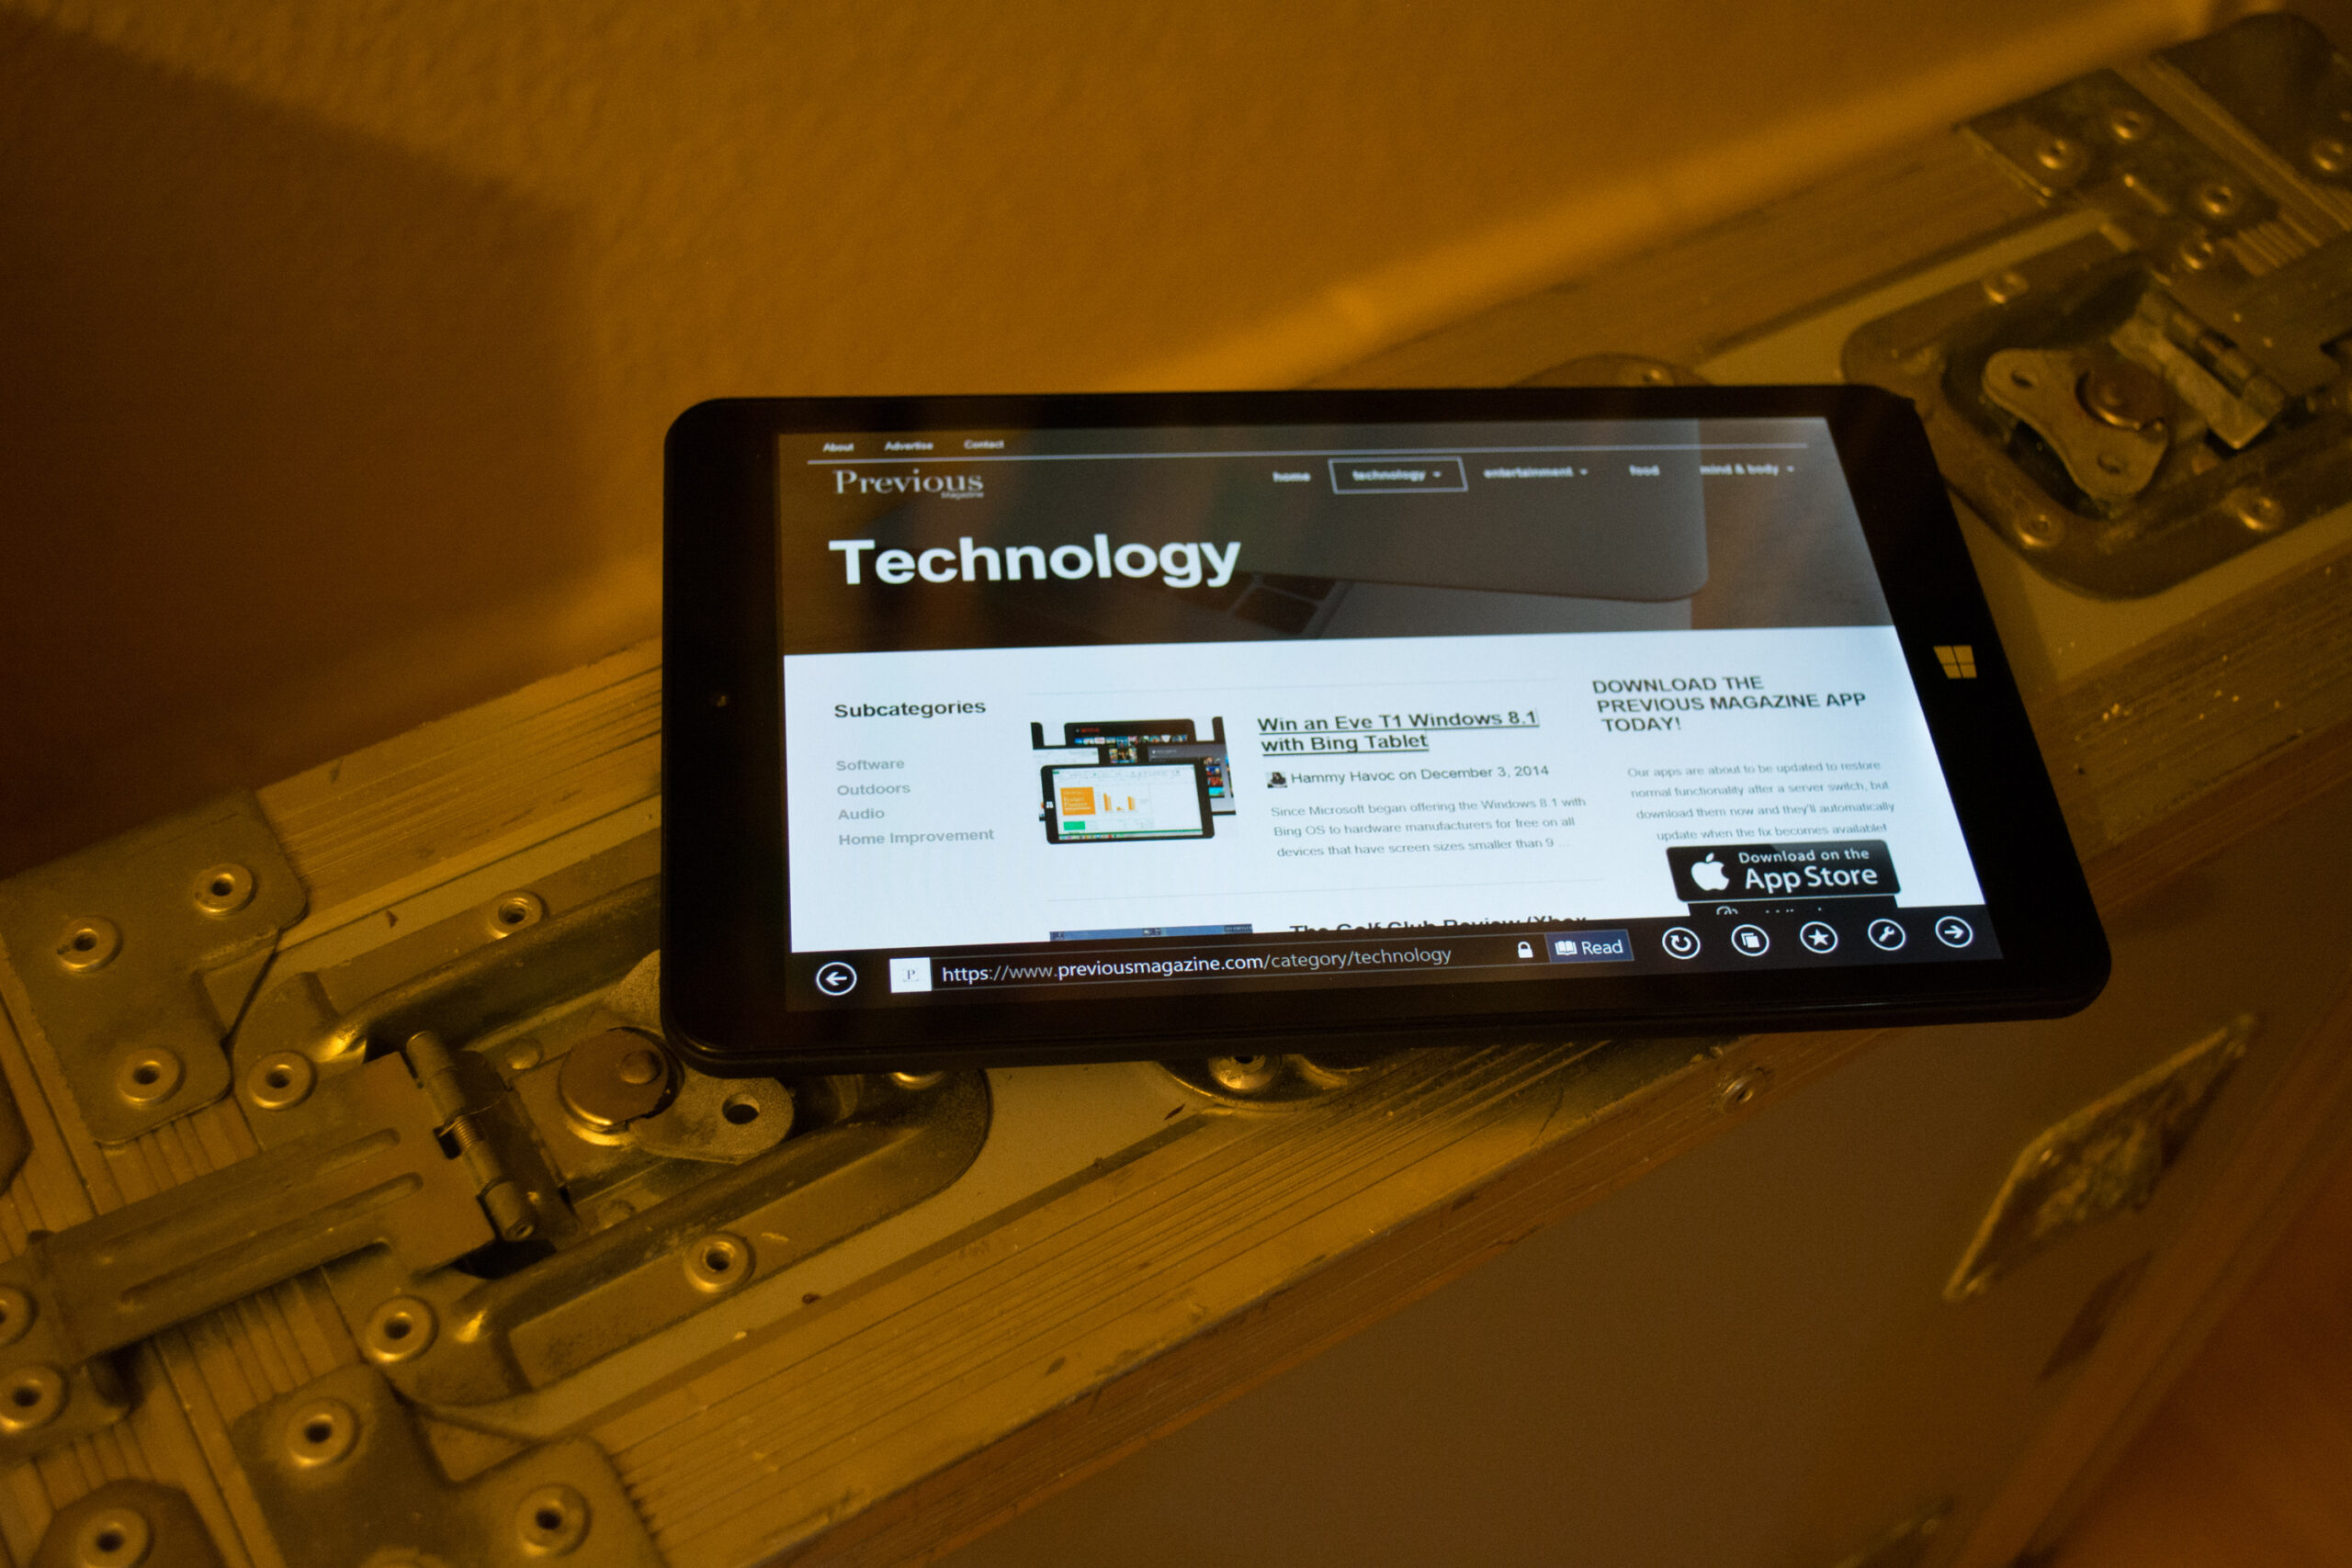 Eve T1 tablet showing the Previous Magazine website on top of flightcase